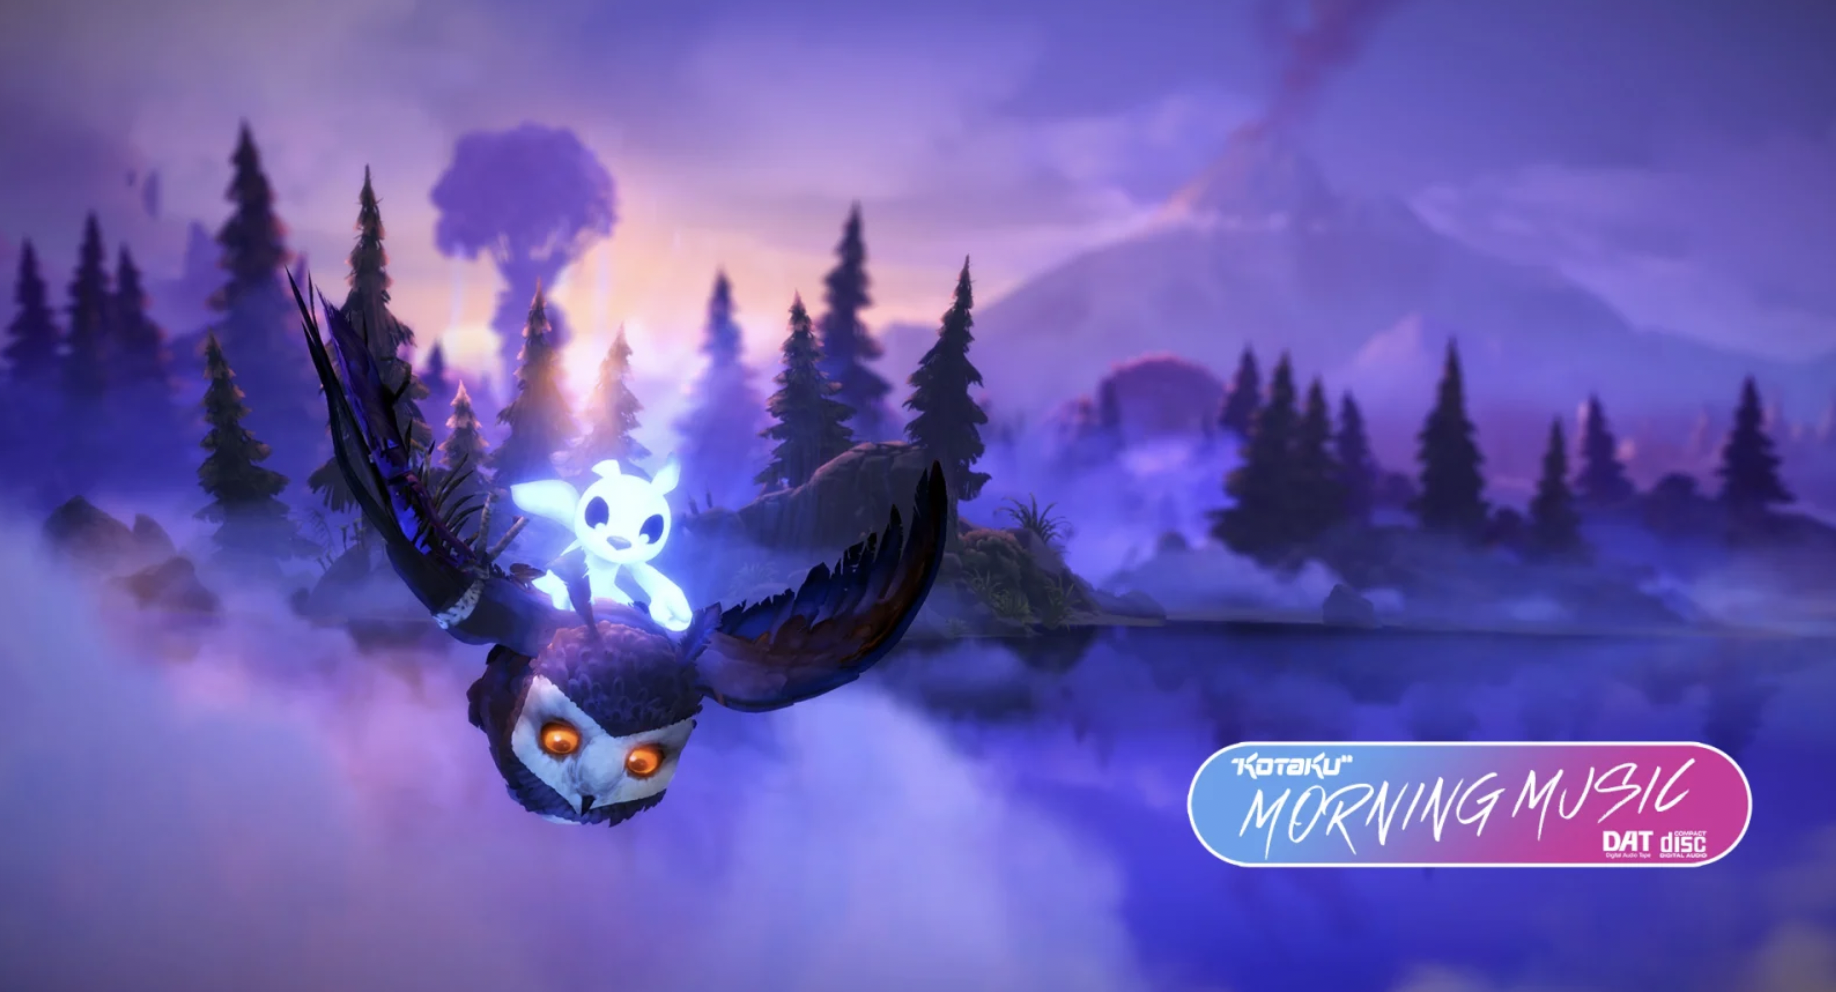 Ori and the Will of the Wisps (Original Soundtrack Recording)